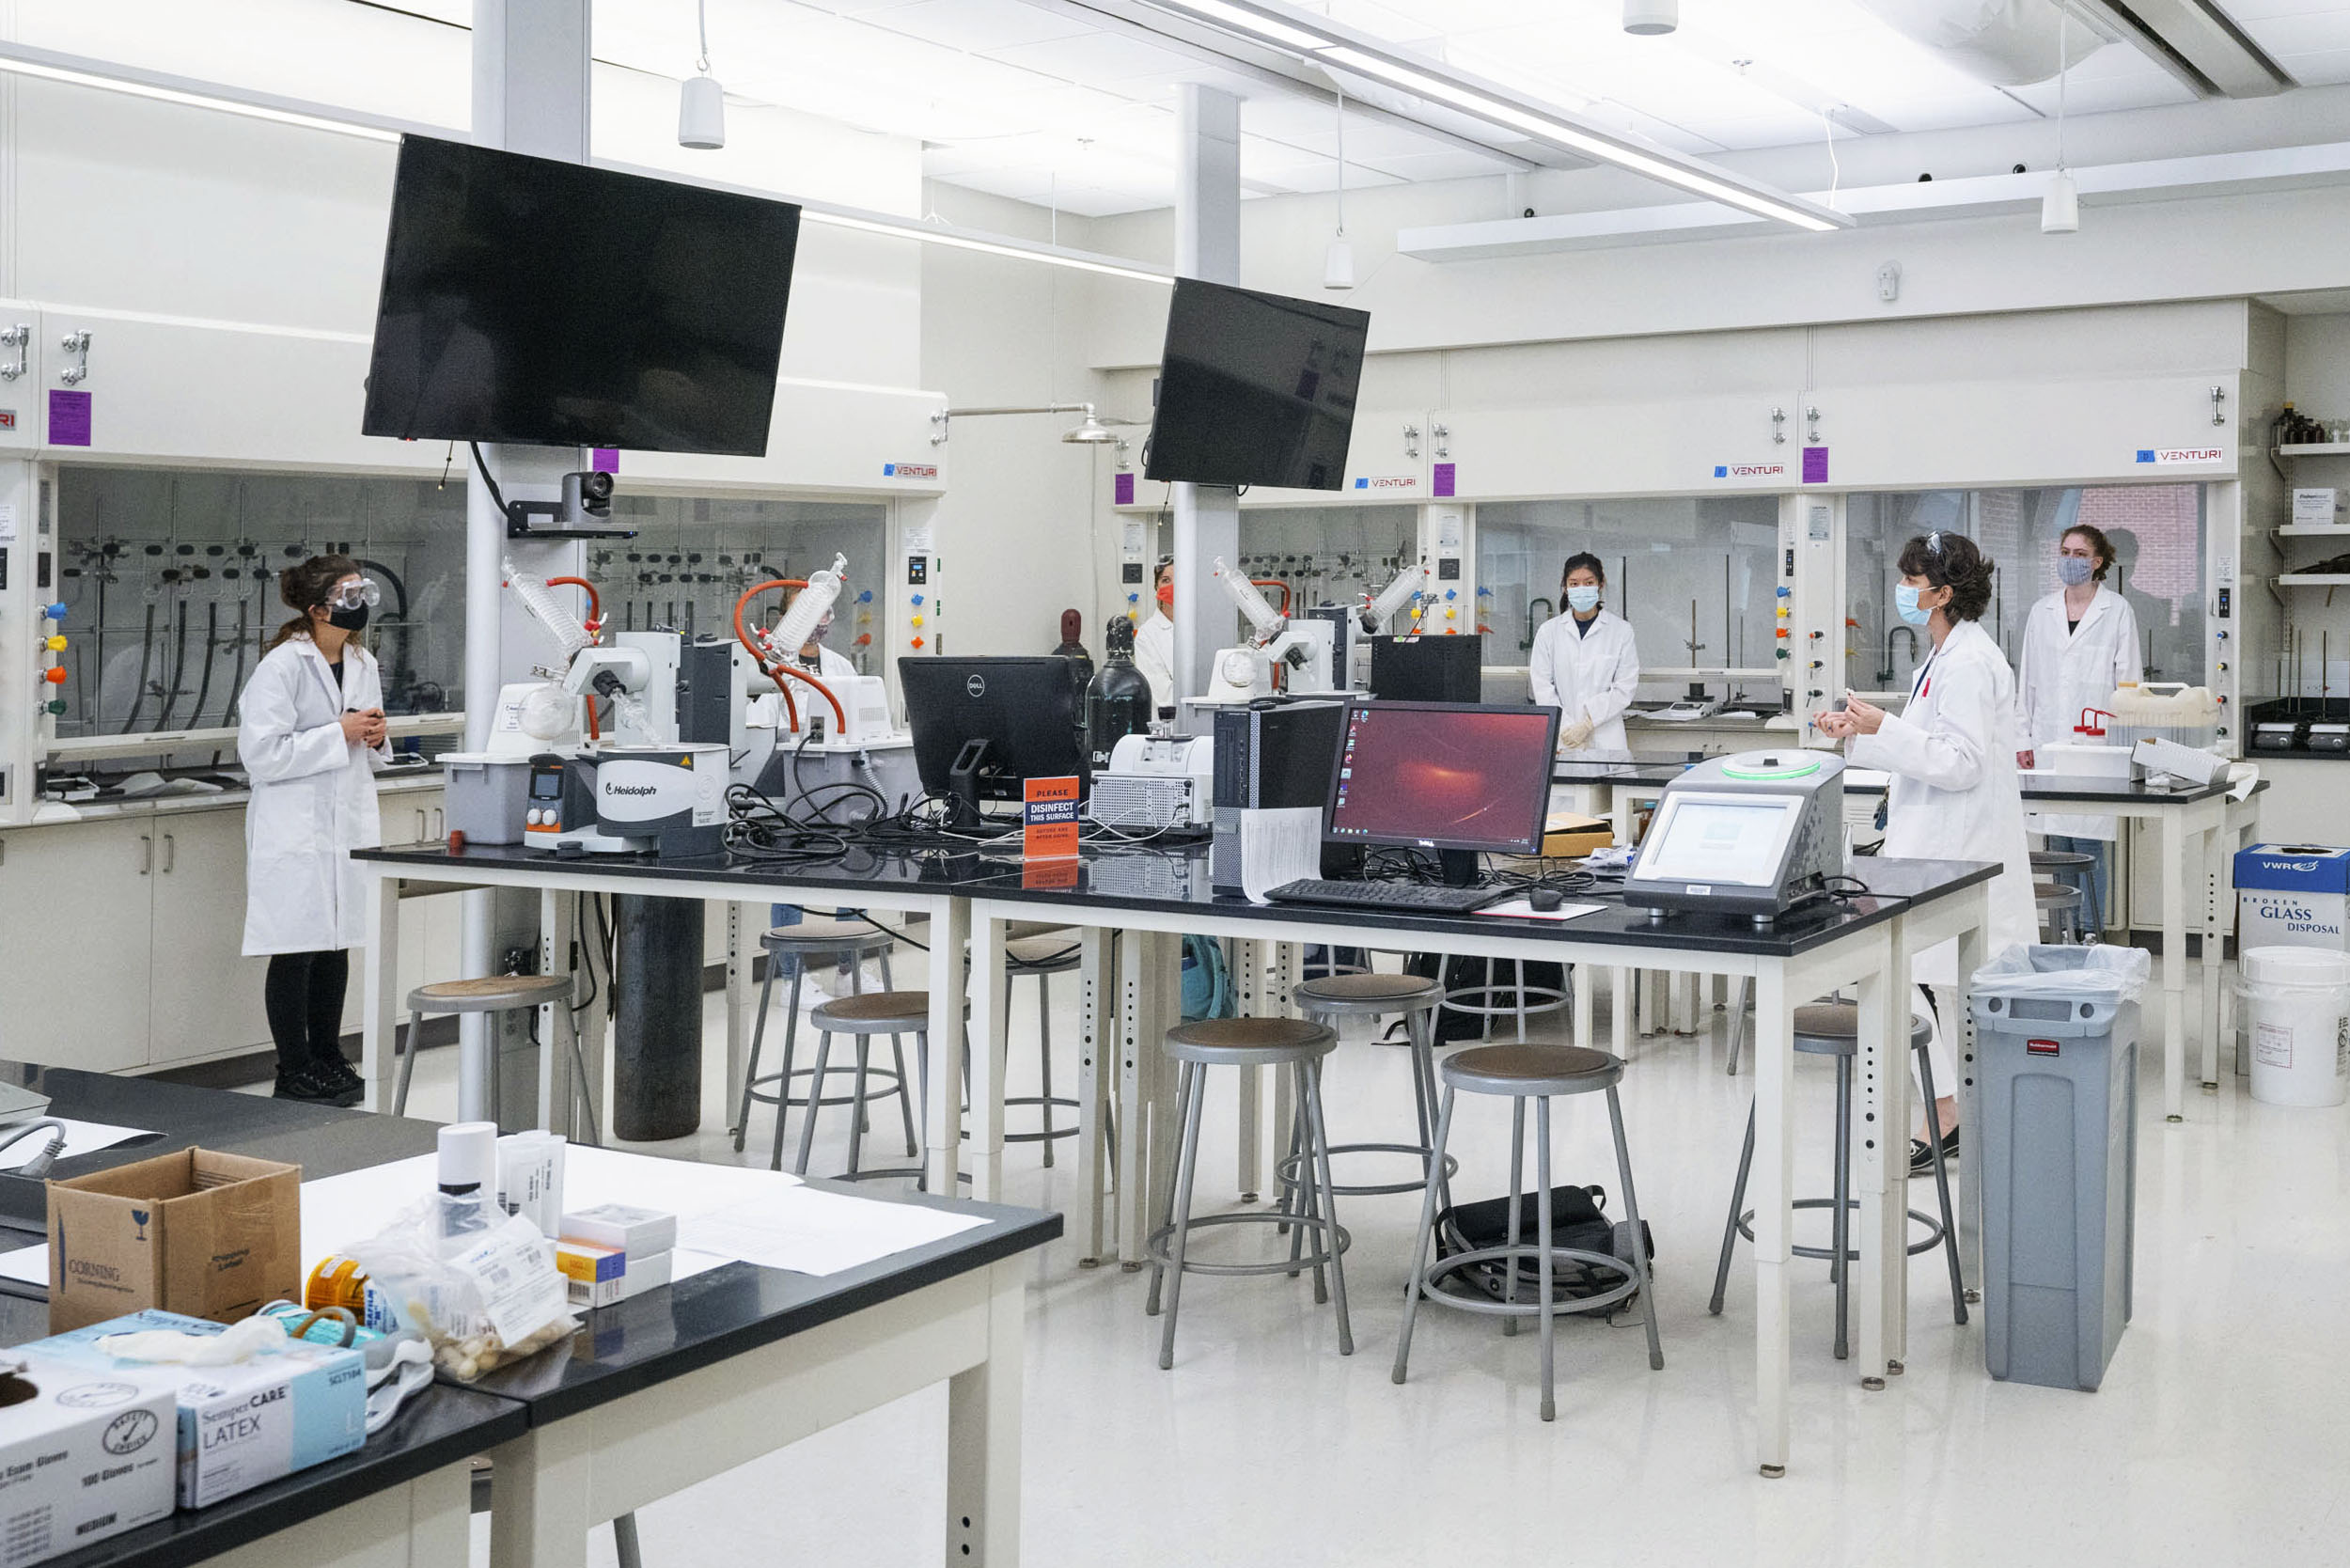 Many lab classes are offered in person in some way, as they are difficult to teach online. Chemistry professor Laura Serbulea arranged her labs to ensure proper distancing. Students stay at their stations until called forward to use equipment.